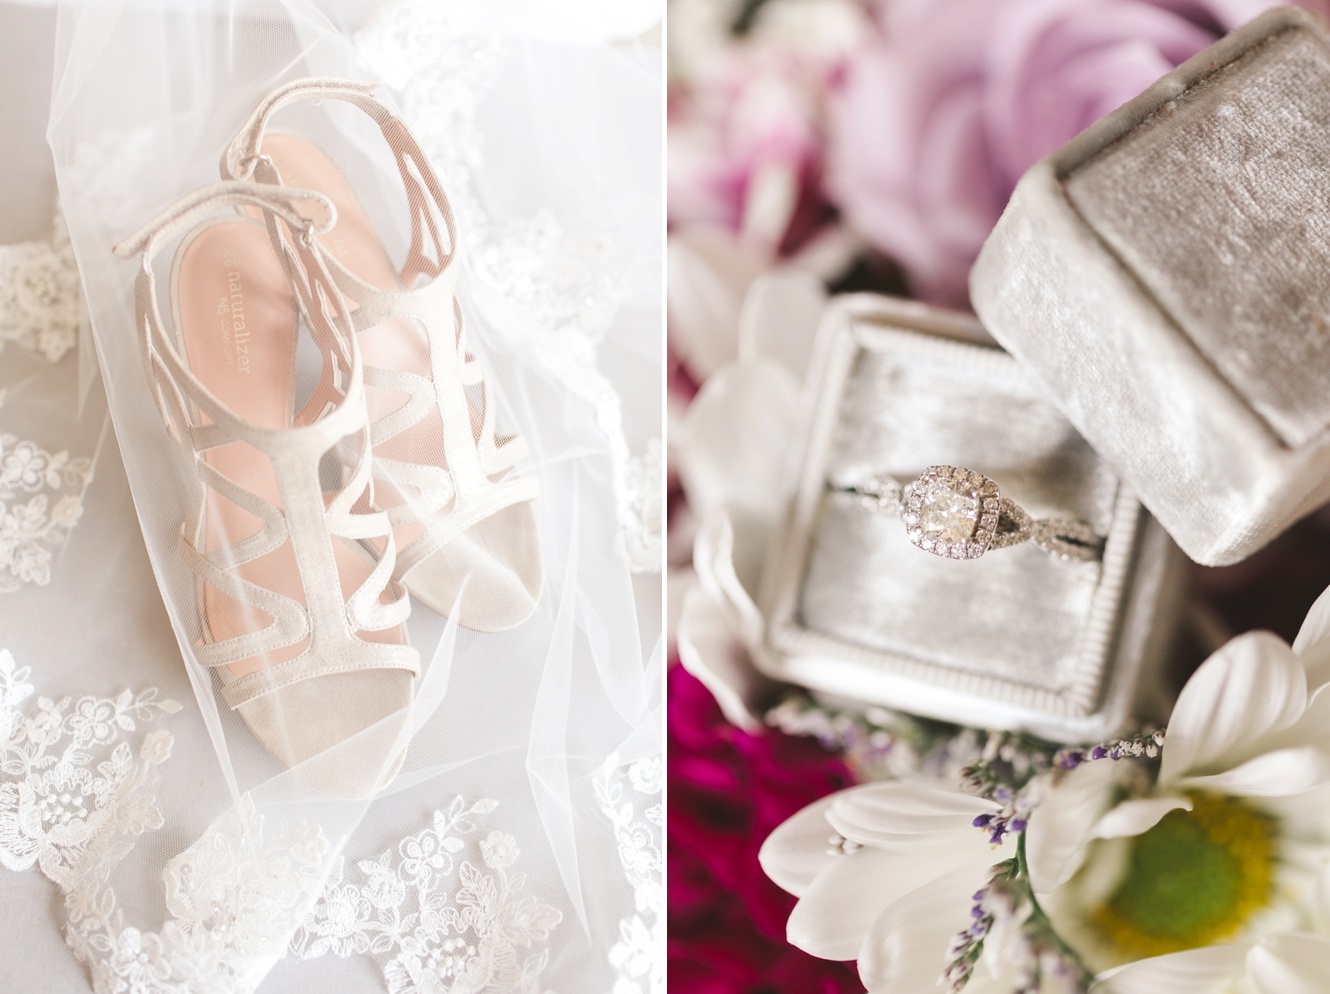 How to photograph Bride's detail photos 